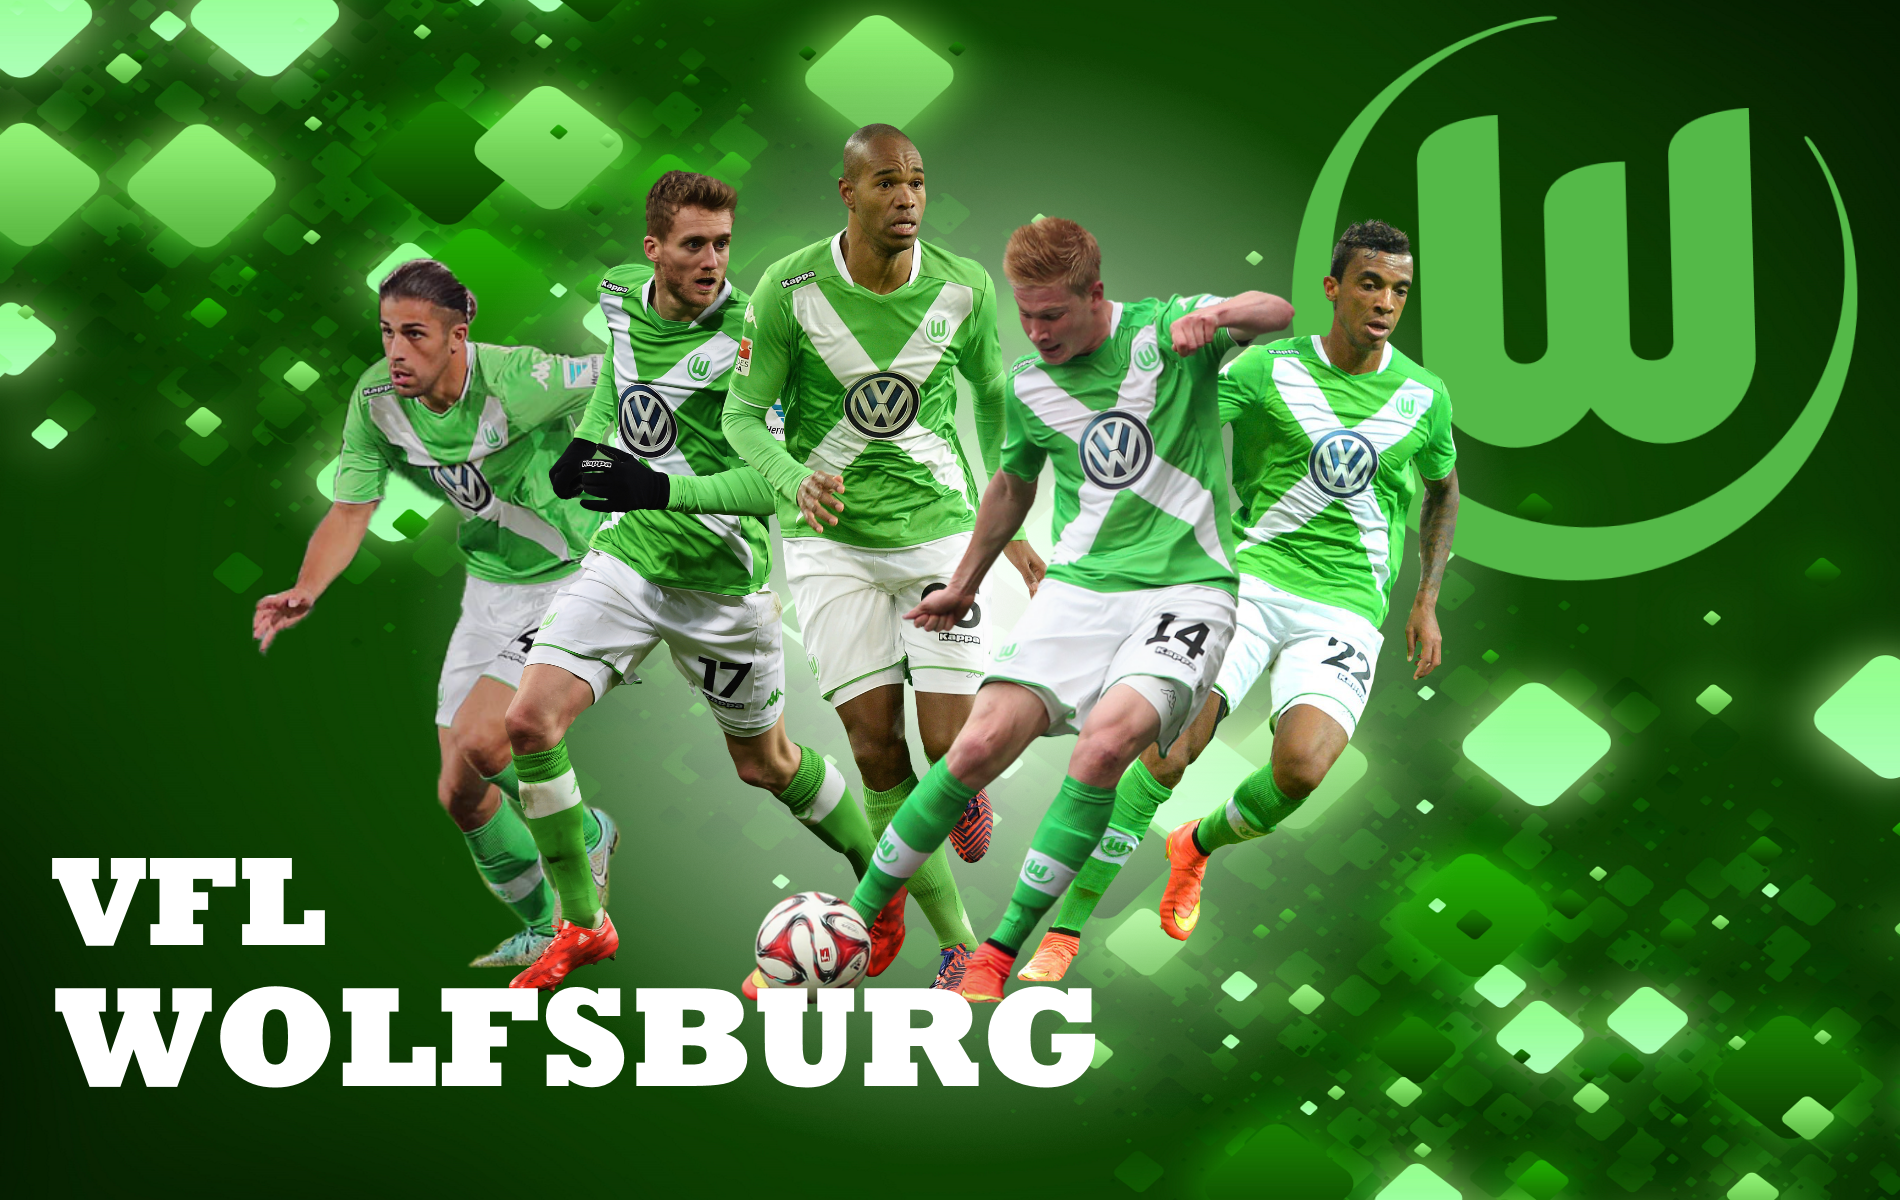 I Made A Wolfsburg Team Background Wallpaper With Rodriguez